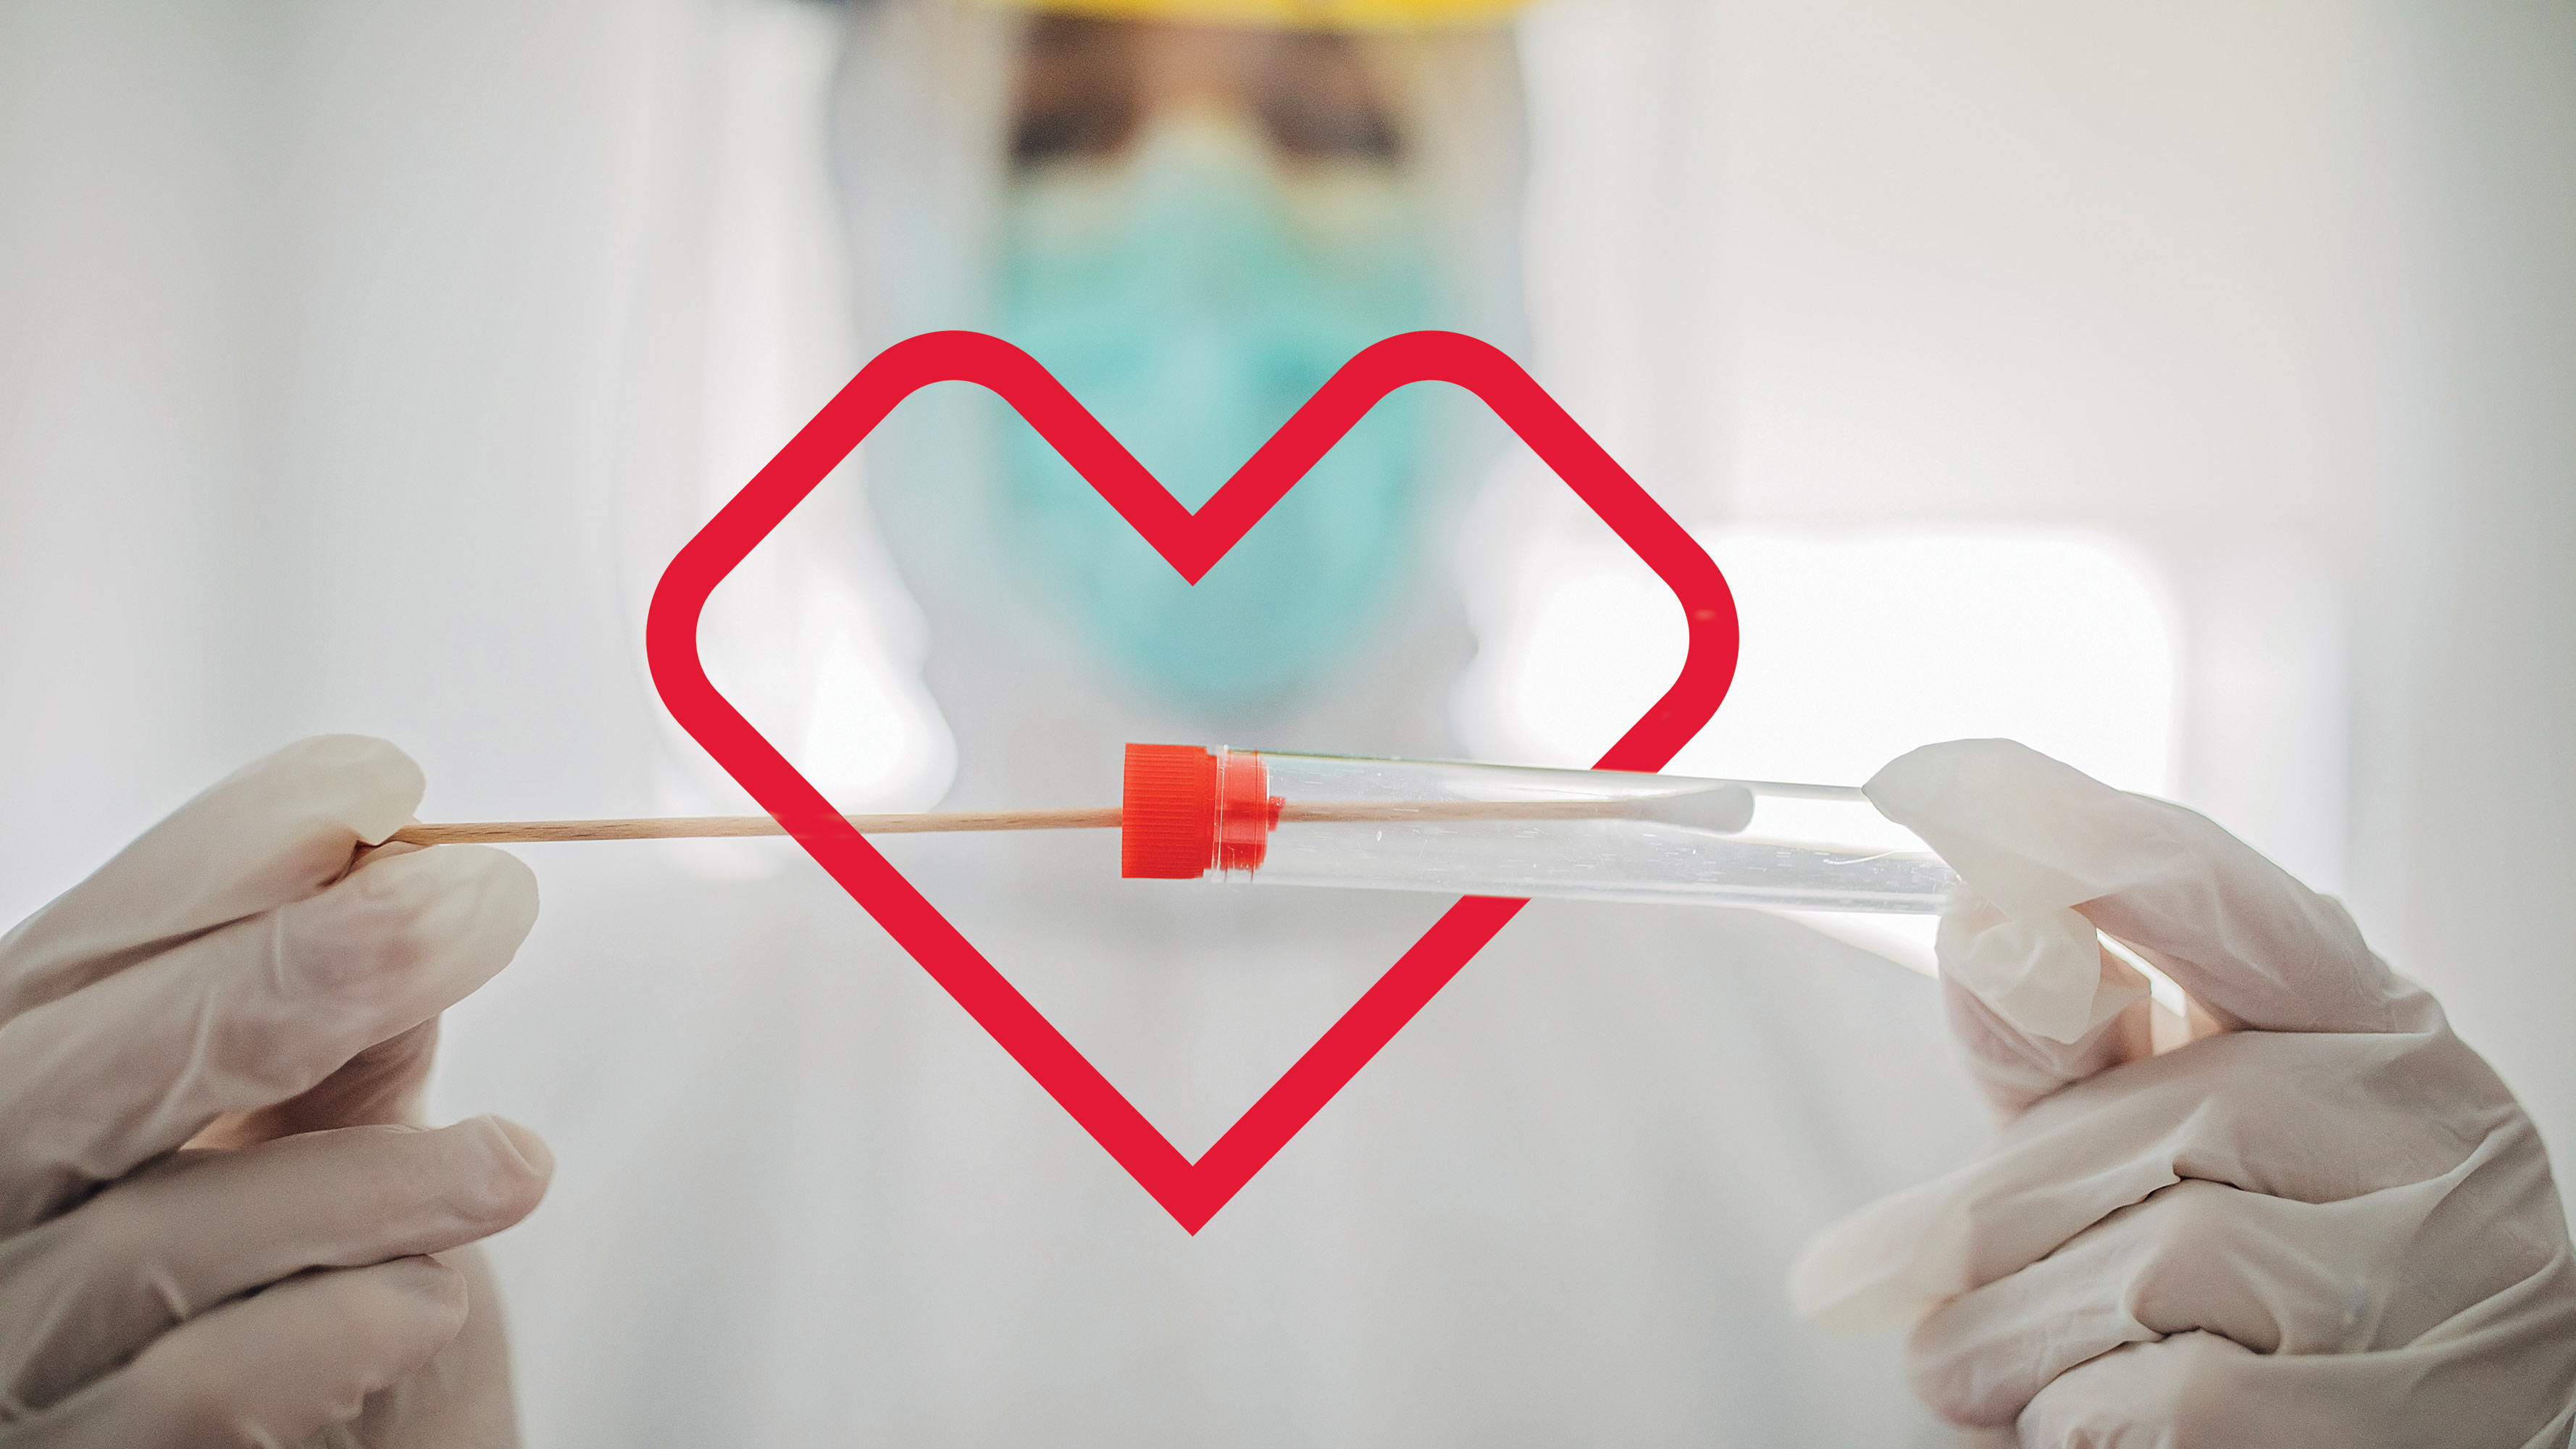 A medical professional, in full personal protective equipment (PPE), inserts a swab into a vial to be processed to test for COVID-19. The vial is surrounded by a red-colored CVS Health heart outline.